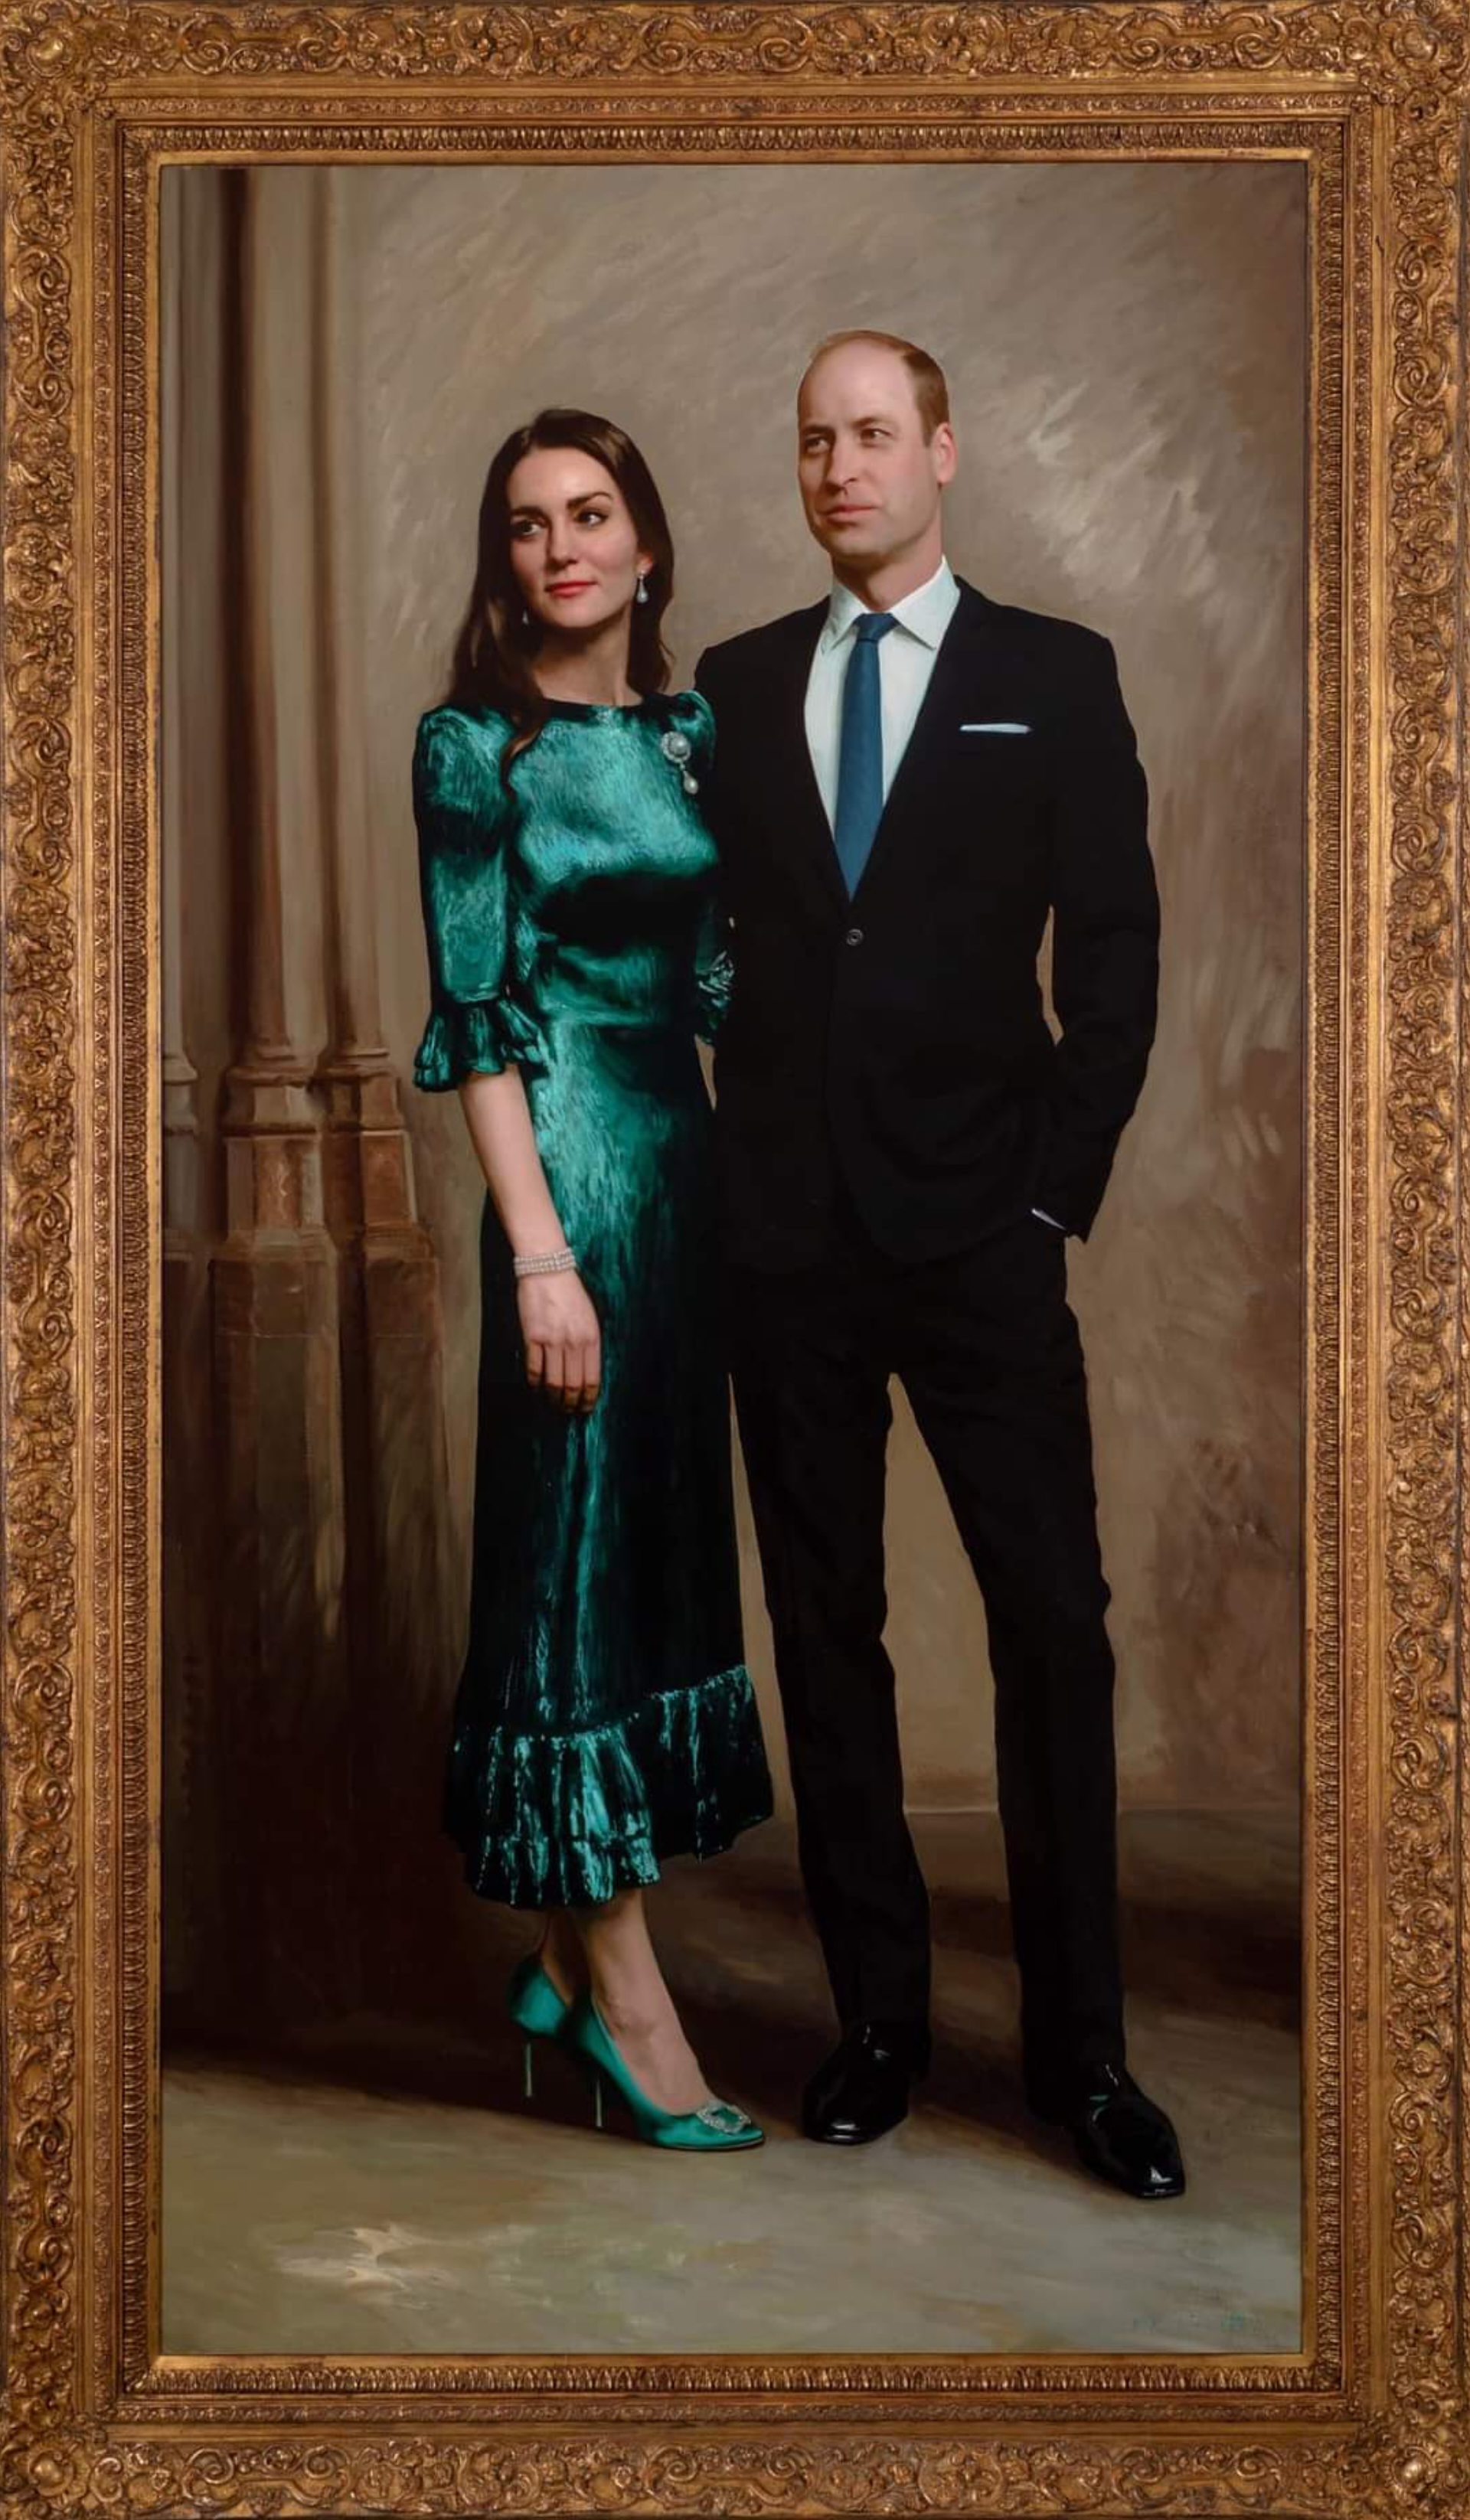 Portrait of Prince William and Kate Middleton